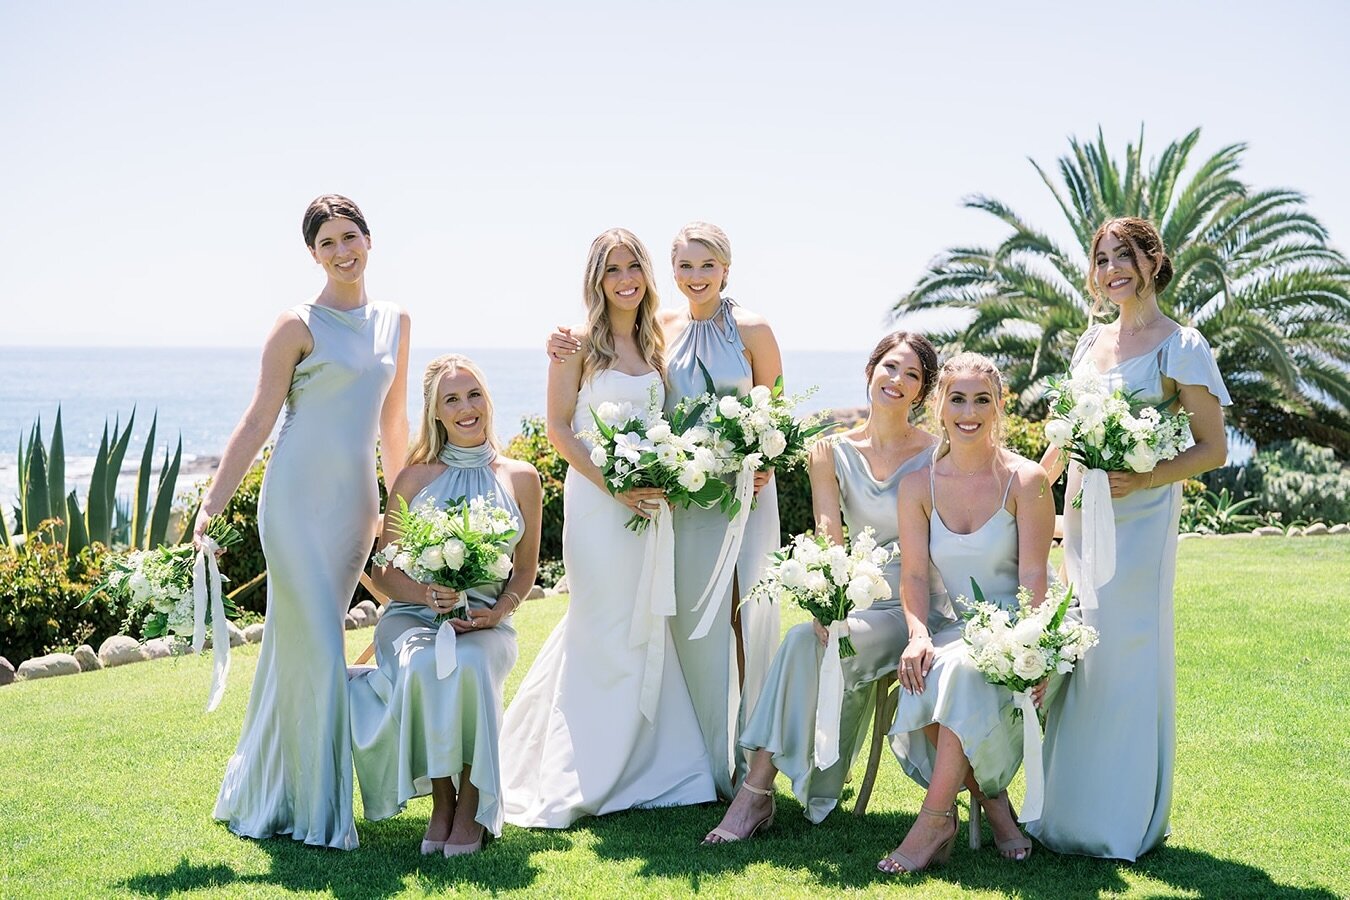 A little green 🍀 for your Saint Patrick&rsquo;s day. 
.
Photographer @taryngreyphotography 
Venue @montageweddings @montagelaguna 
Florals @knotjustflowers